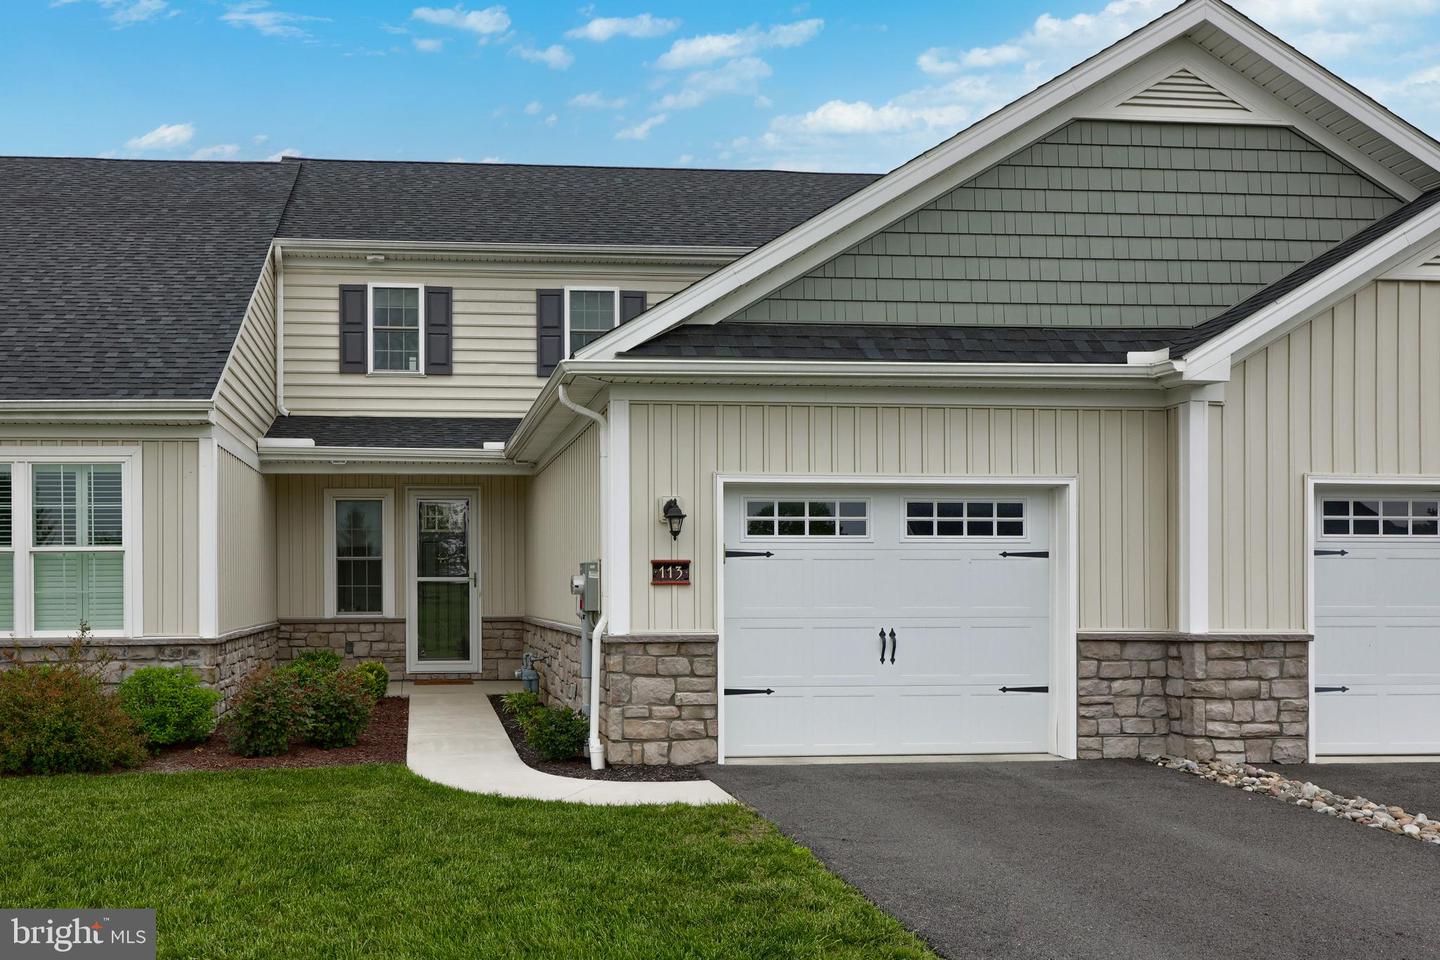 View Millersville, PA 17551 townhome